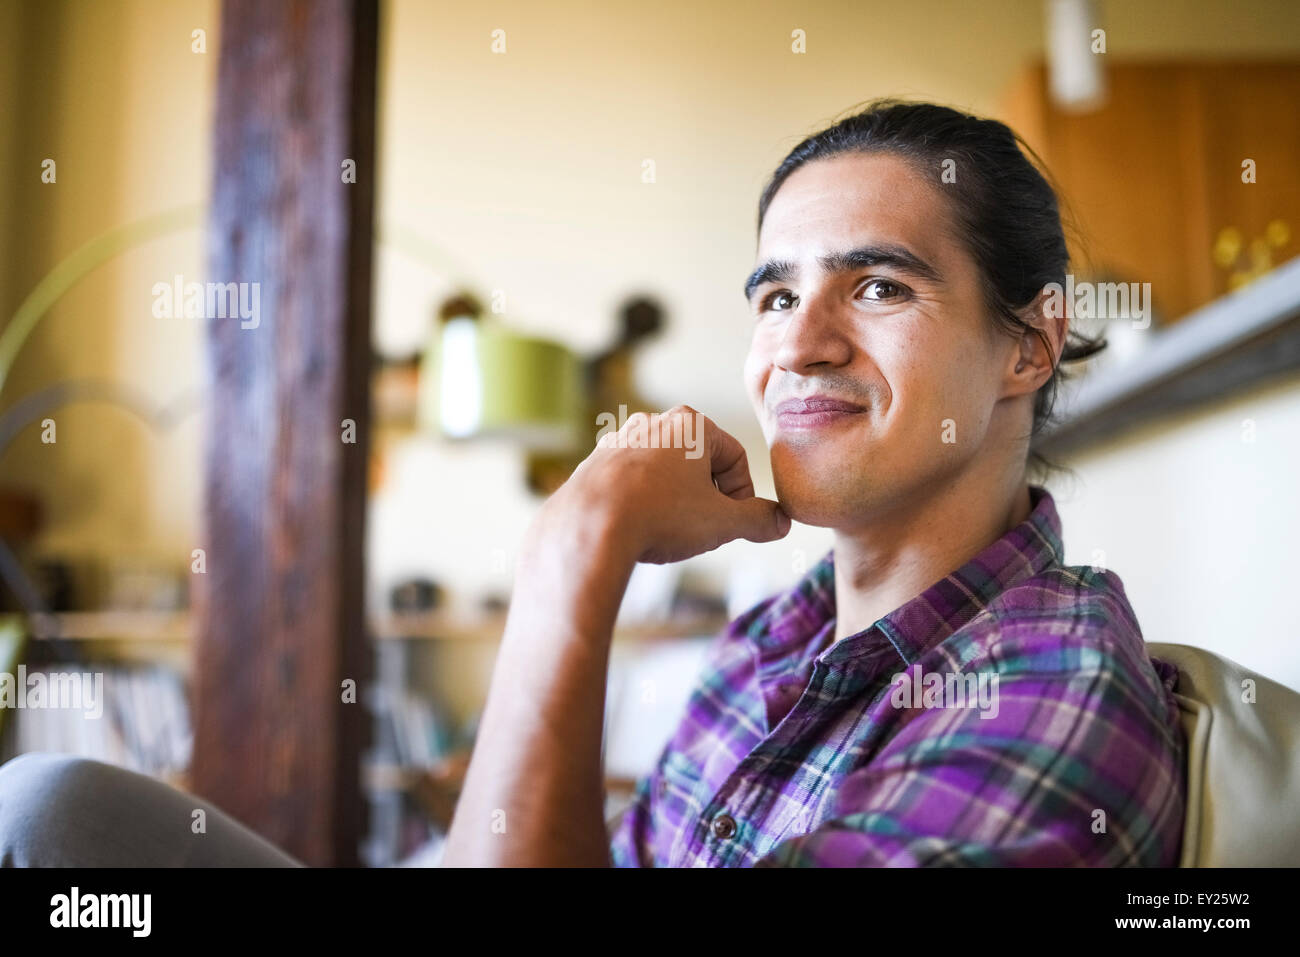 Portrait of young man sitting indoors relaxing Stock Photo